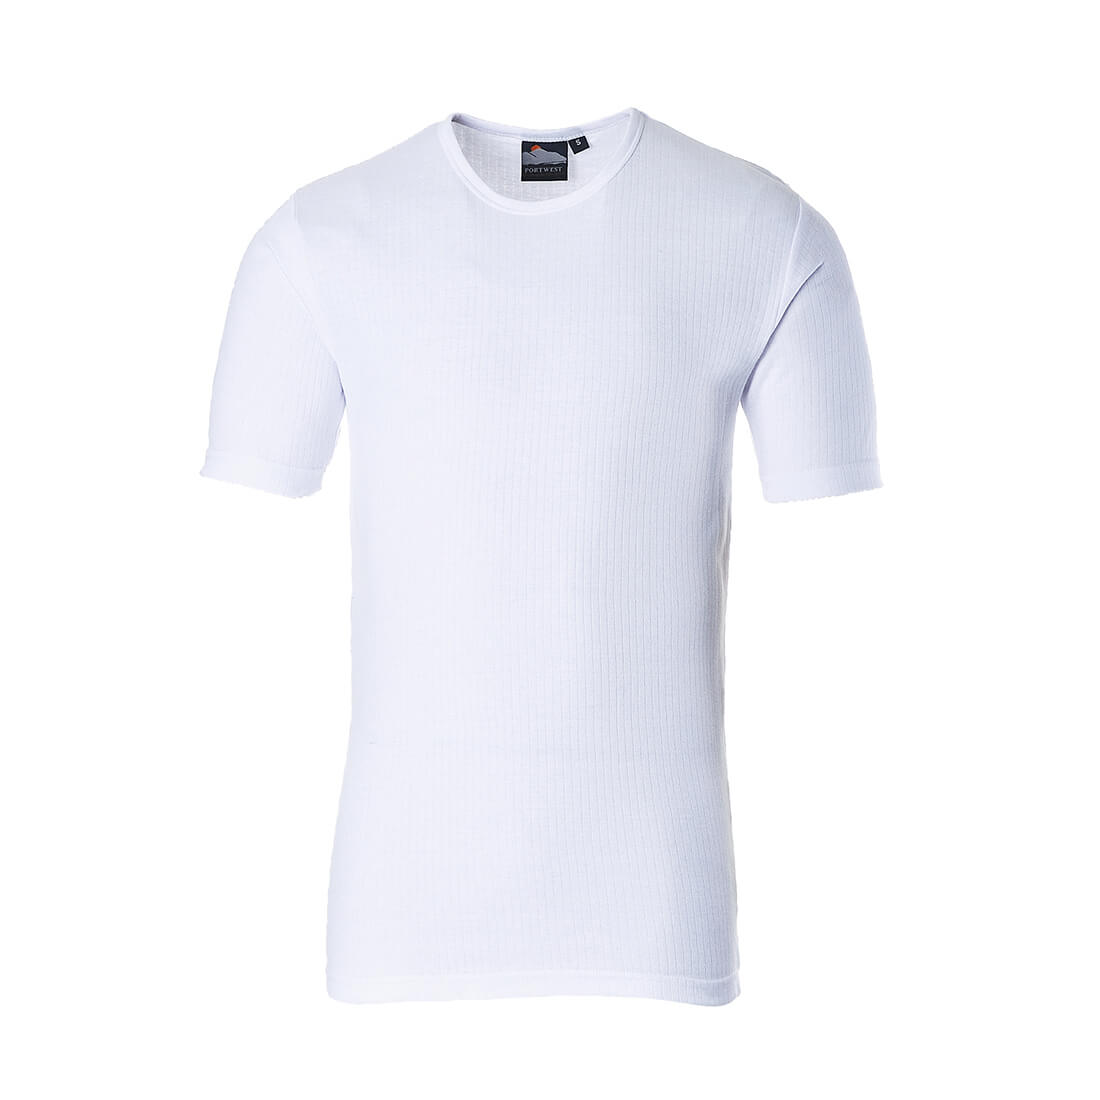 Image of Portwest Thermal Short Sleeve T Shirt White XL